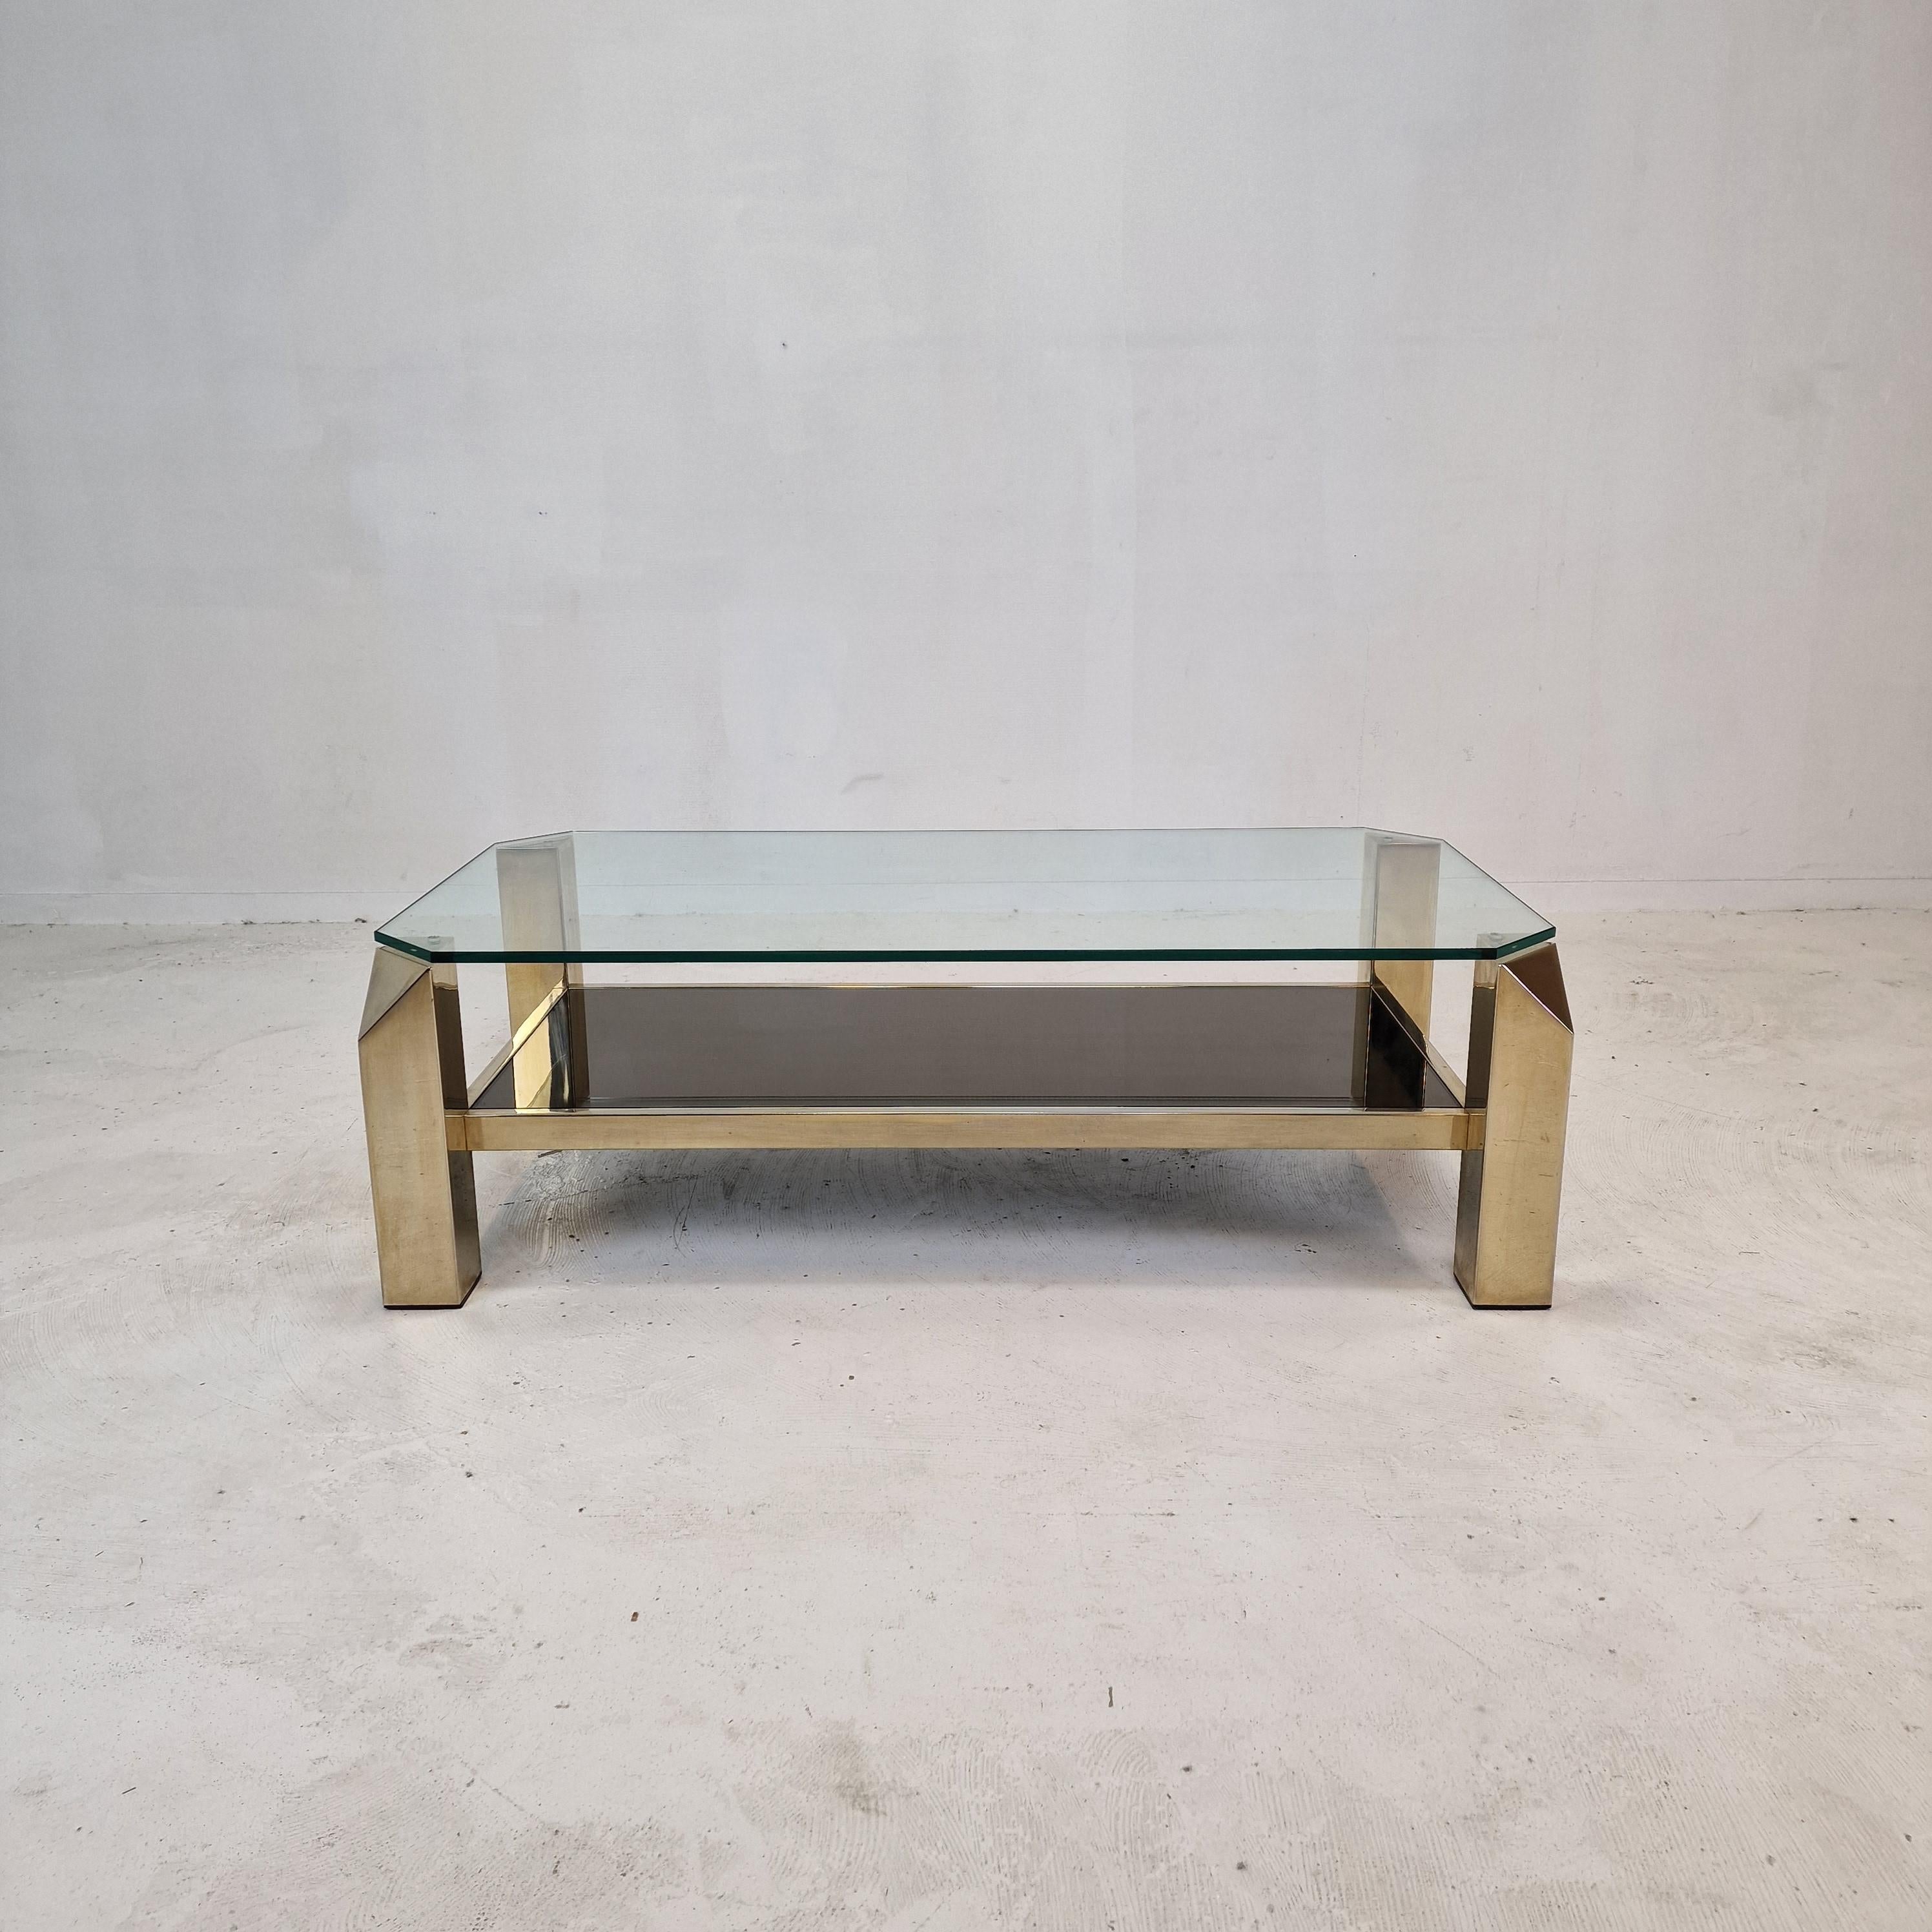 Beautiful coffee table by Belgo Chrom - Dewulf selection, fabricated in the 1970s in Belgium.

A two tier coffee table with a 23kt gold plated base. 
The legs have a geometric design. 

It has the original fumé - smoked mirror glass below and a